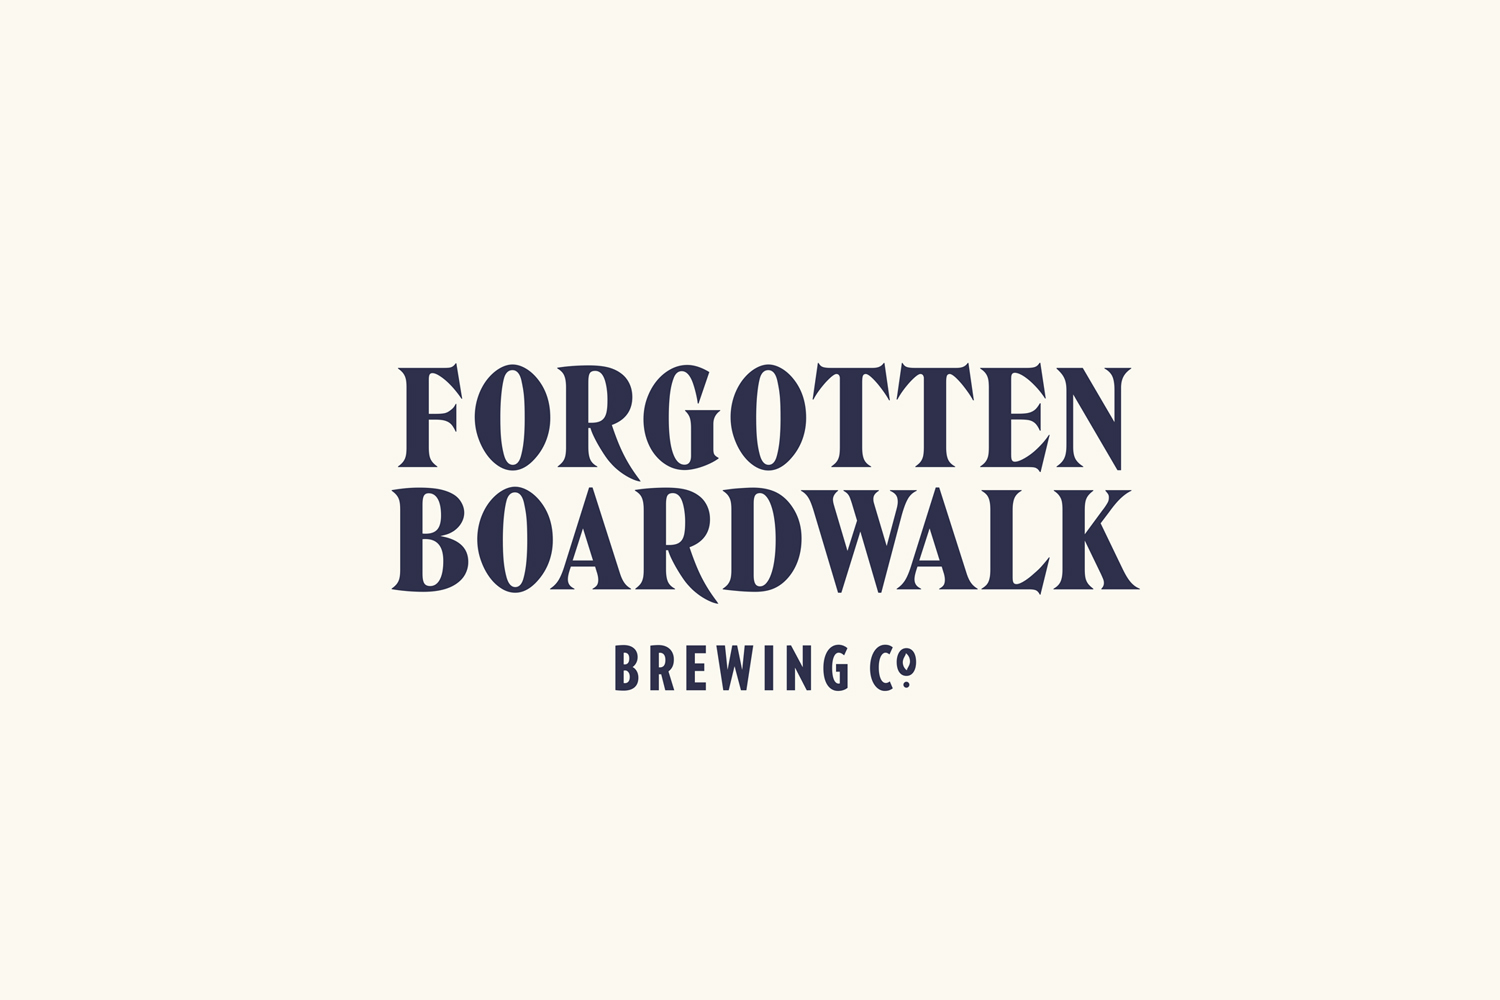 Creative Logotype Gallery & Inspiration: Forgotten Boardwalk Brewing by Perky Bros, United States